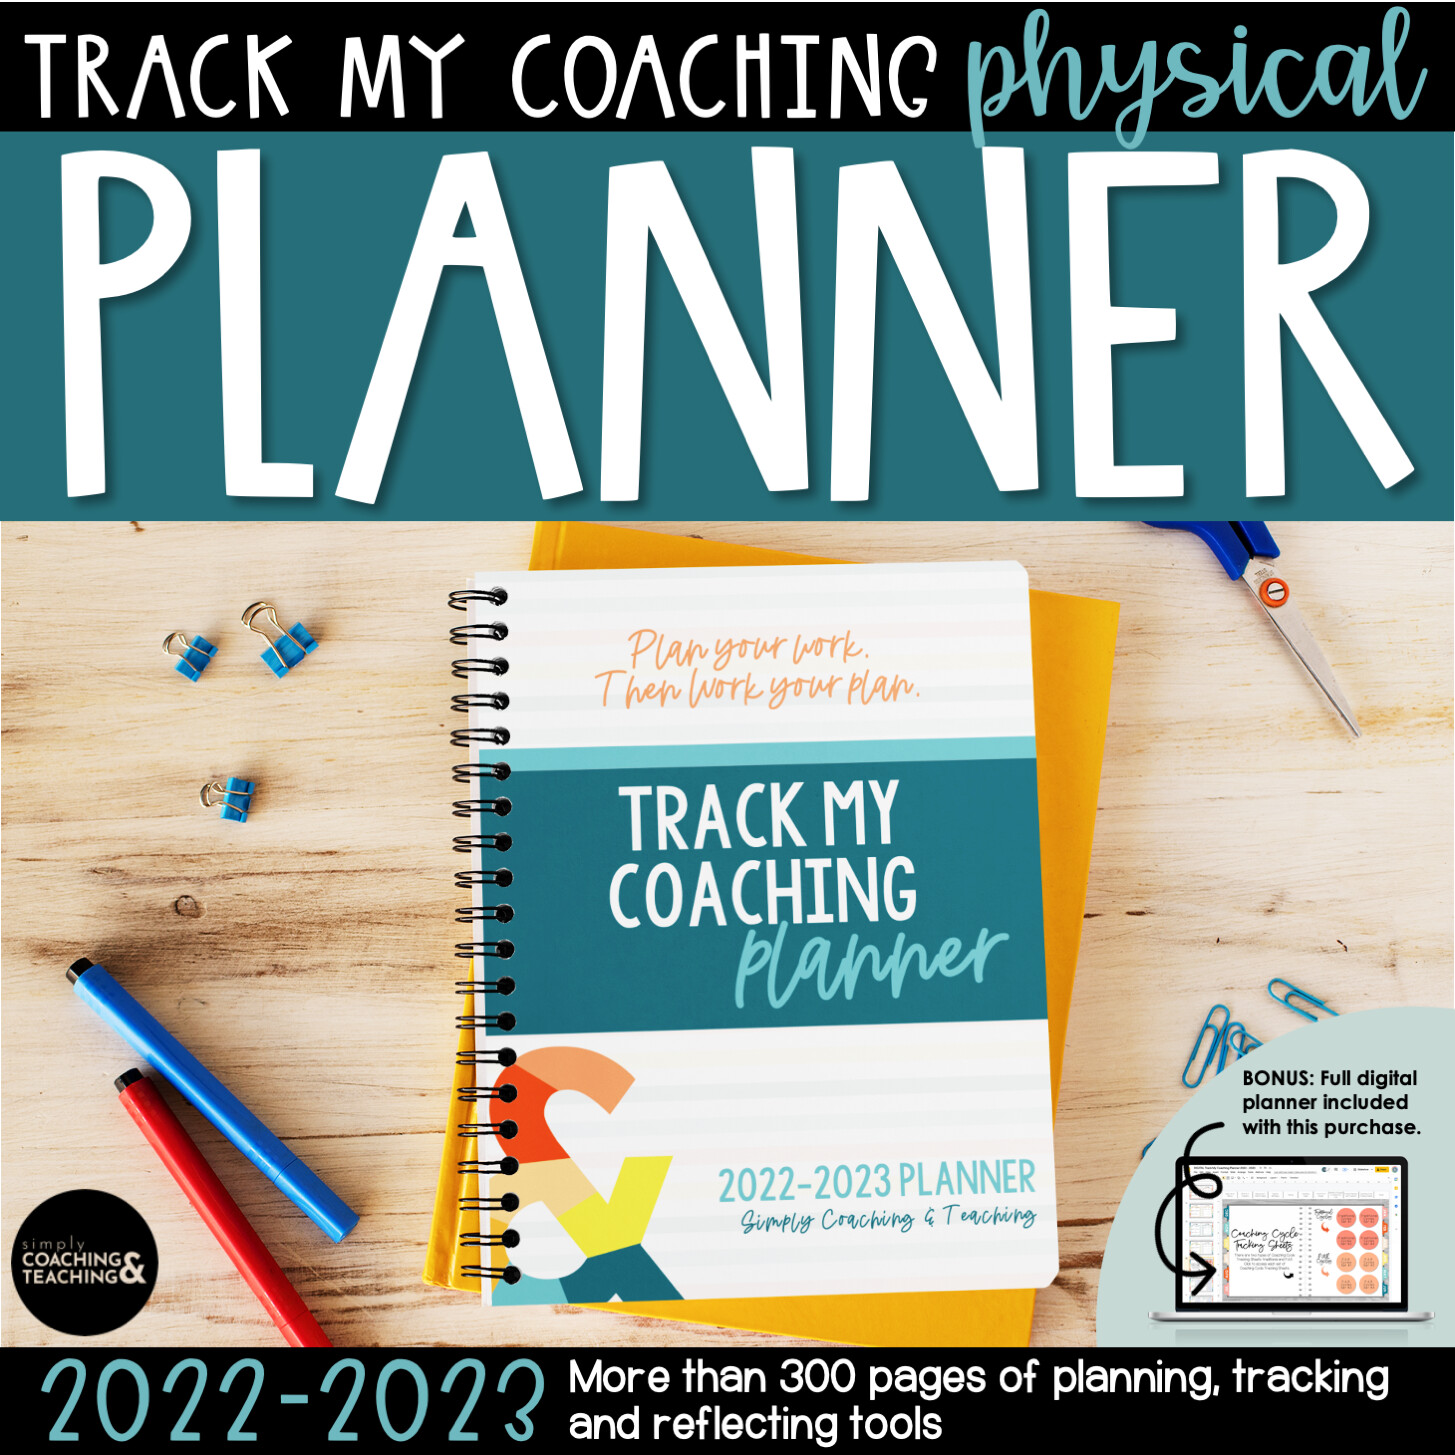 Track My Coaching 2022 - 2023 Physical Planner ROUND 4